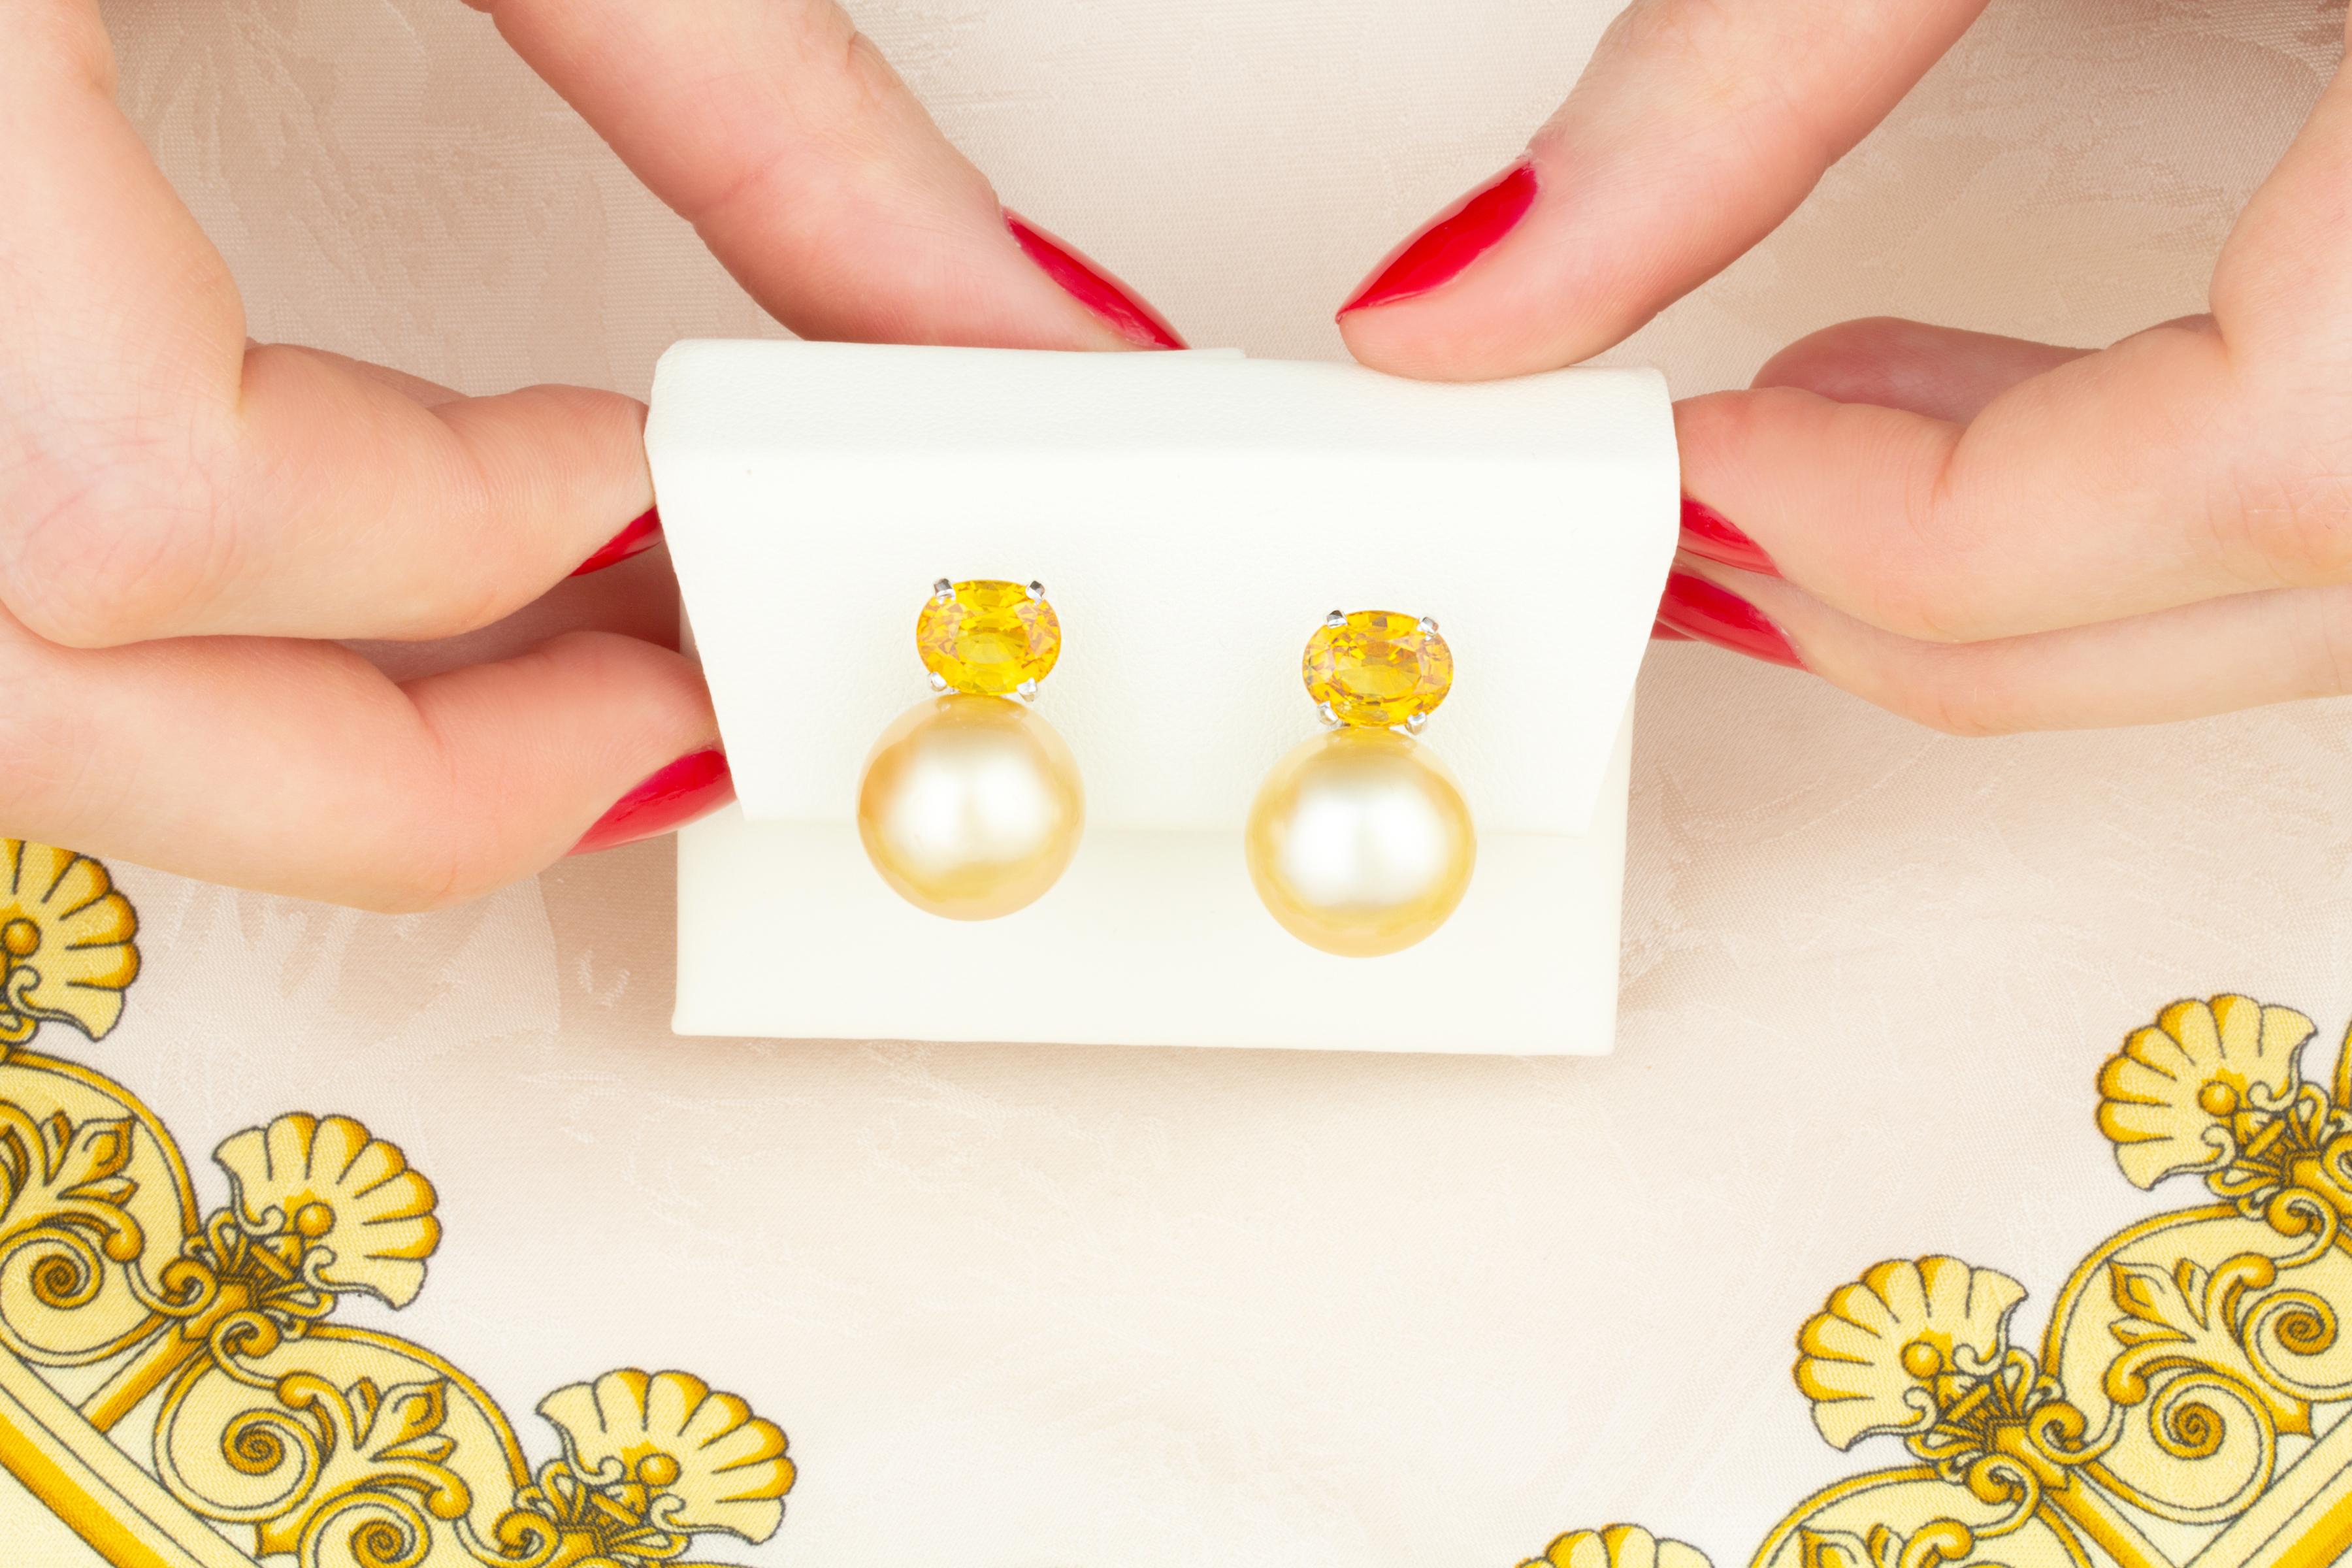 The sapphire and pearl earrings feature two 13.5mm South Sea pearls from the waters of Northwestern Australia. The pearls display beautiful nacre and a lovely golden color. They are untreated. The design is complete with 2 faceted oval cut yellow